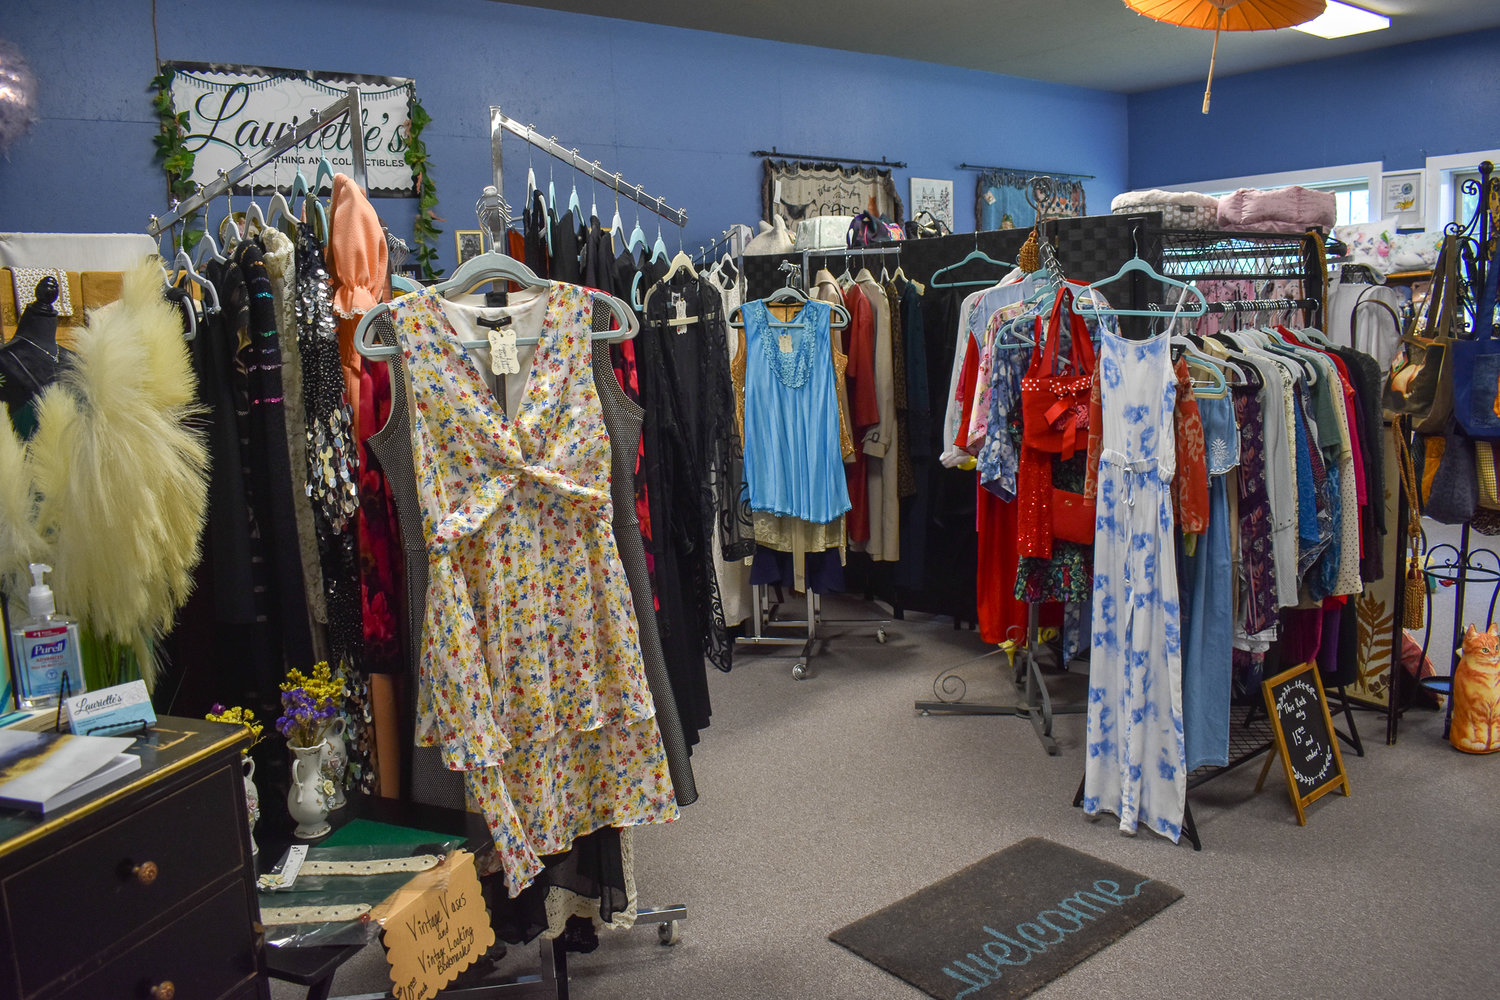 When exploring the Shoppes at Johnny Appleseed's nearly 20,000 square foot facility, one can find this vendor selling a variety of women's clothing.